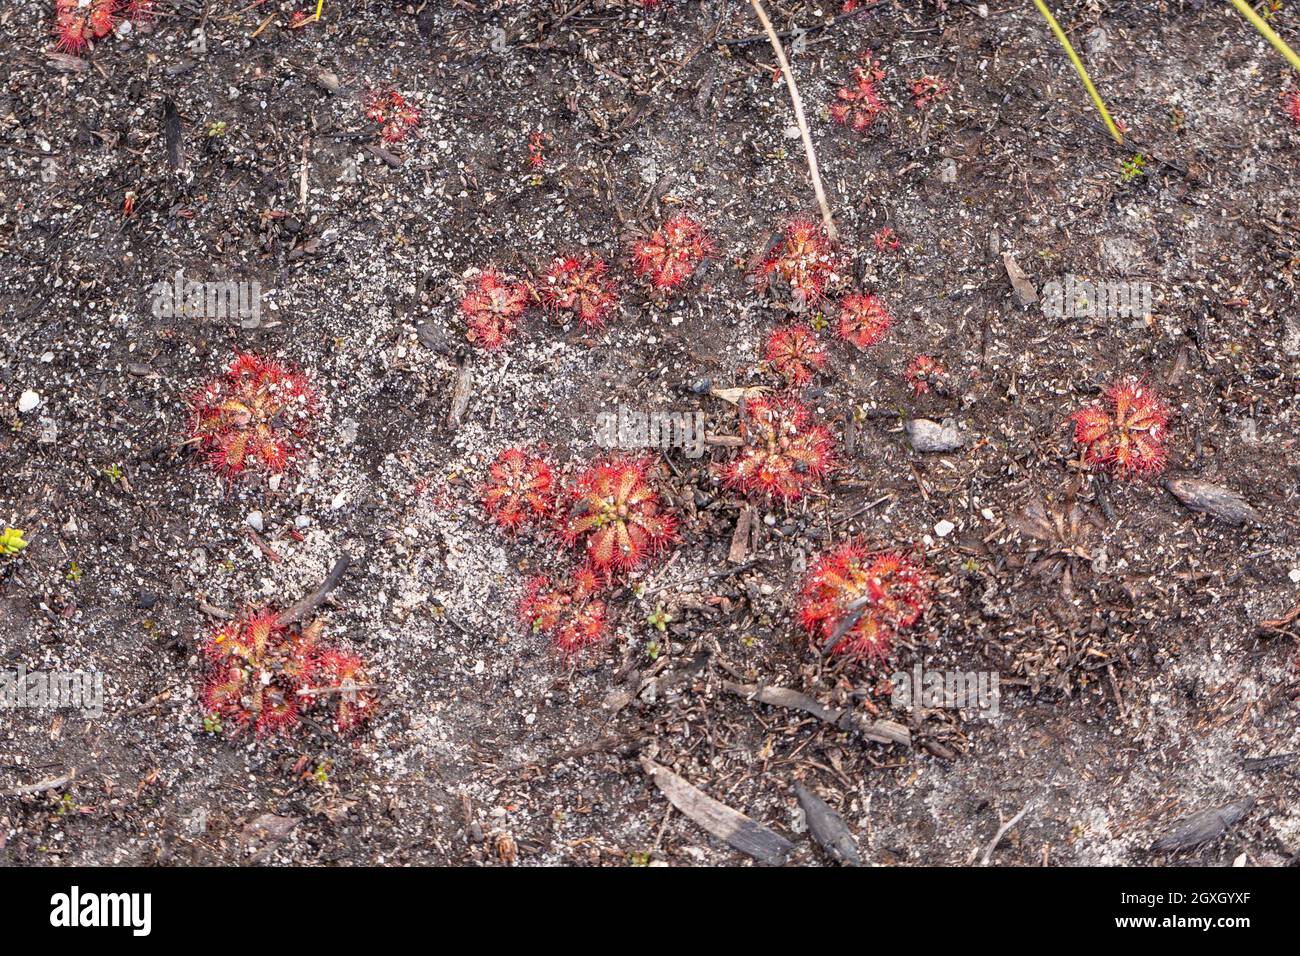 Some red Sundews in natural habitat close to Barrydale in the Western Cape of South Africa Stock Photo